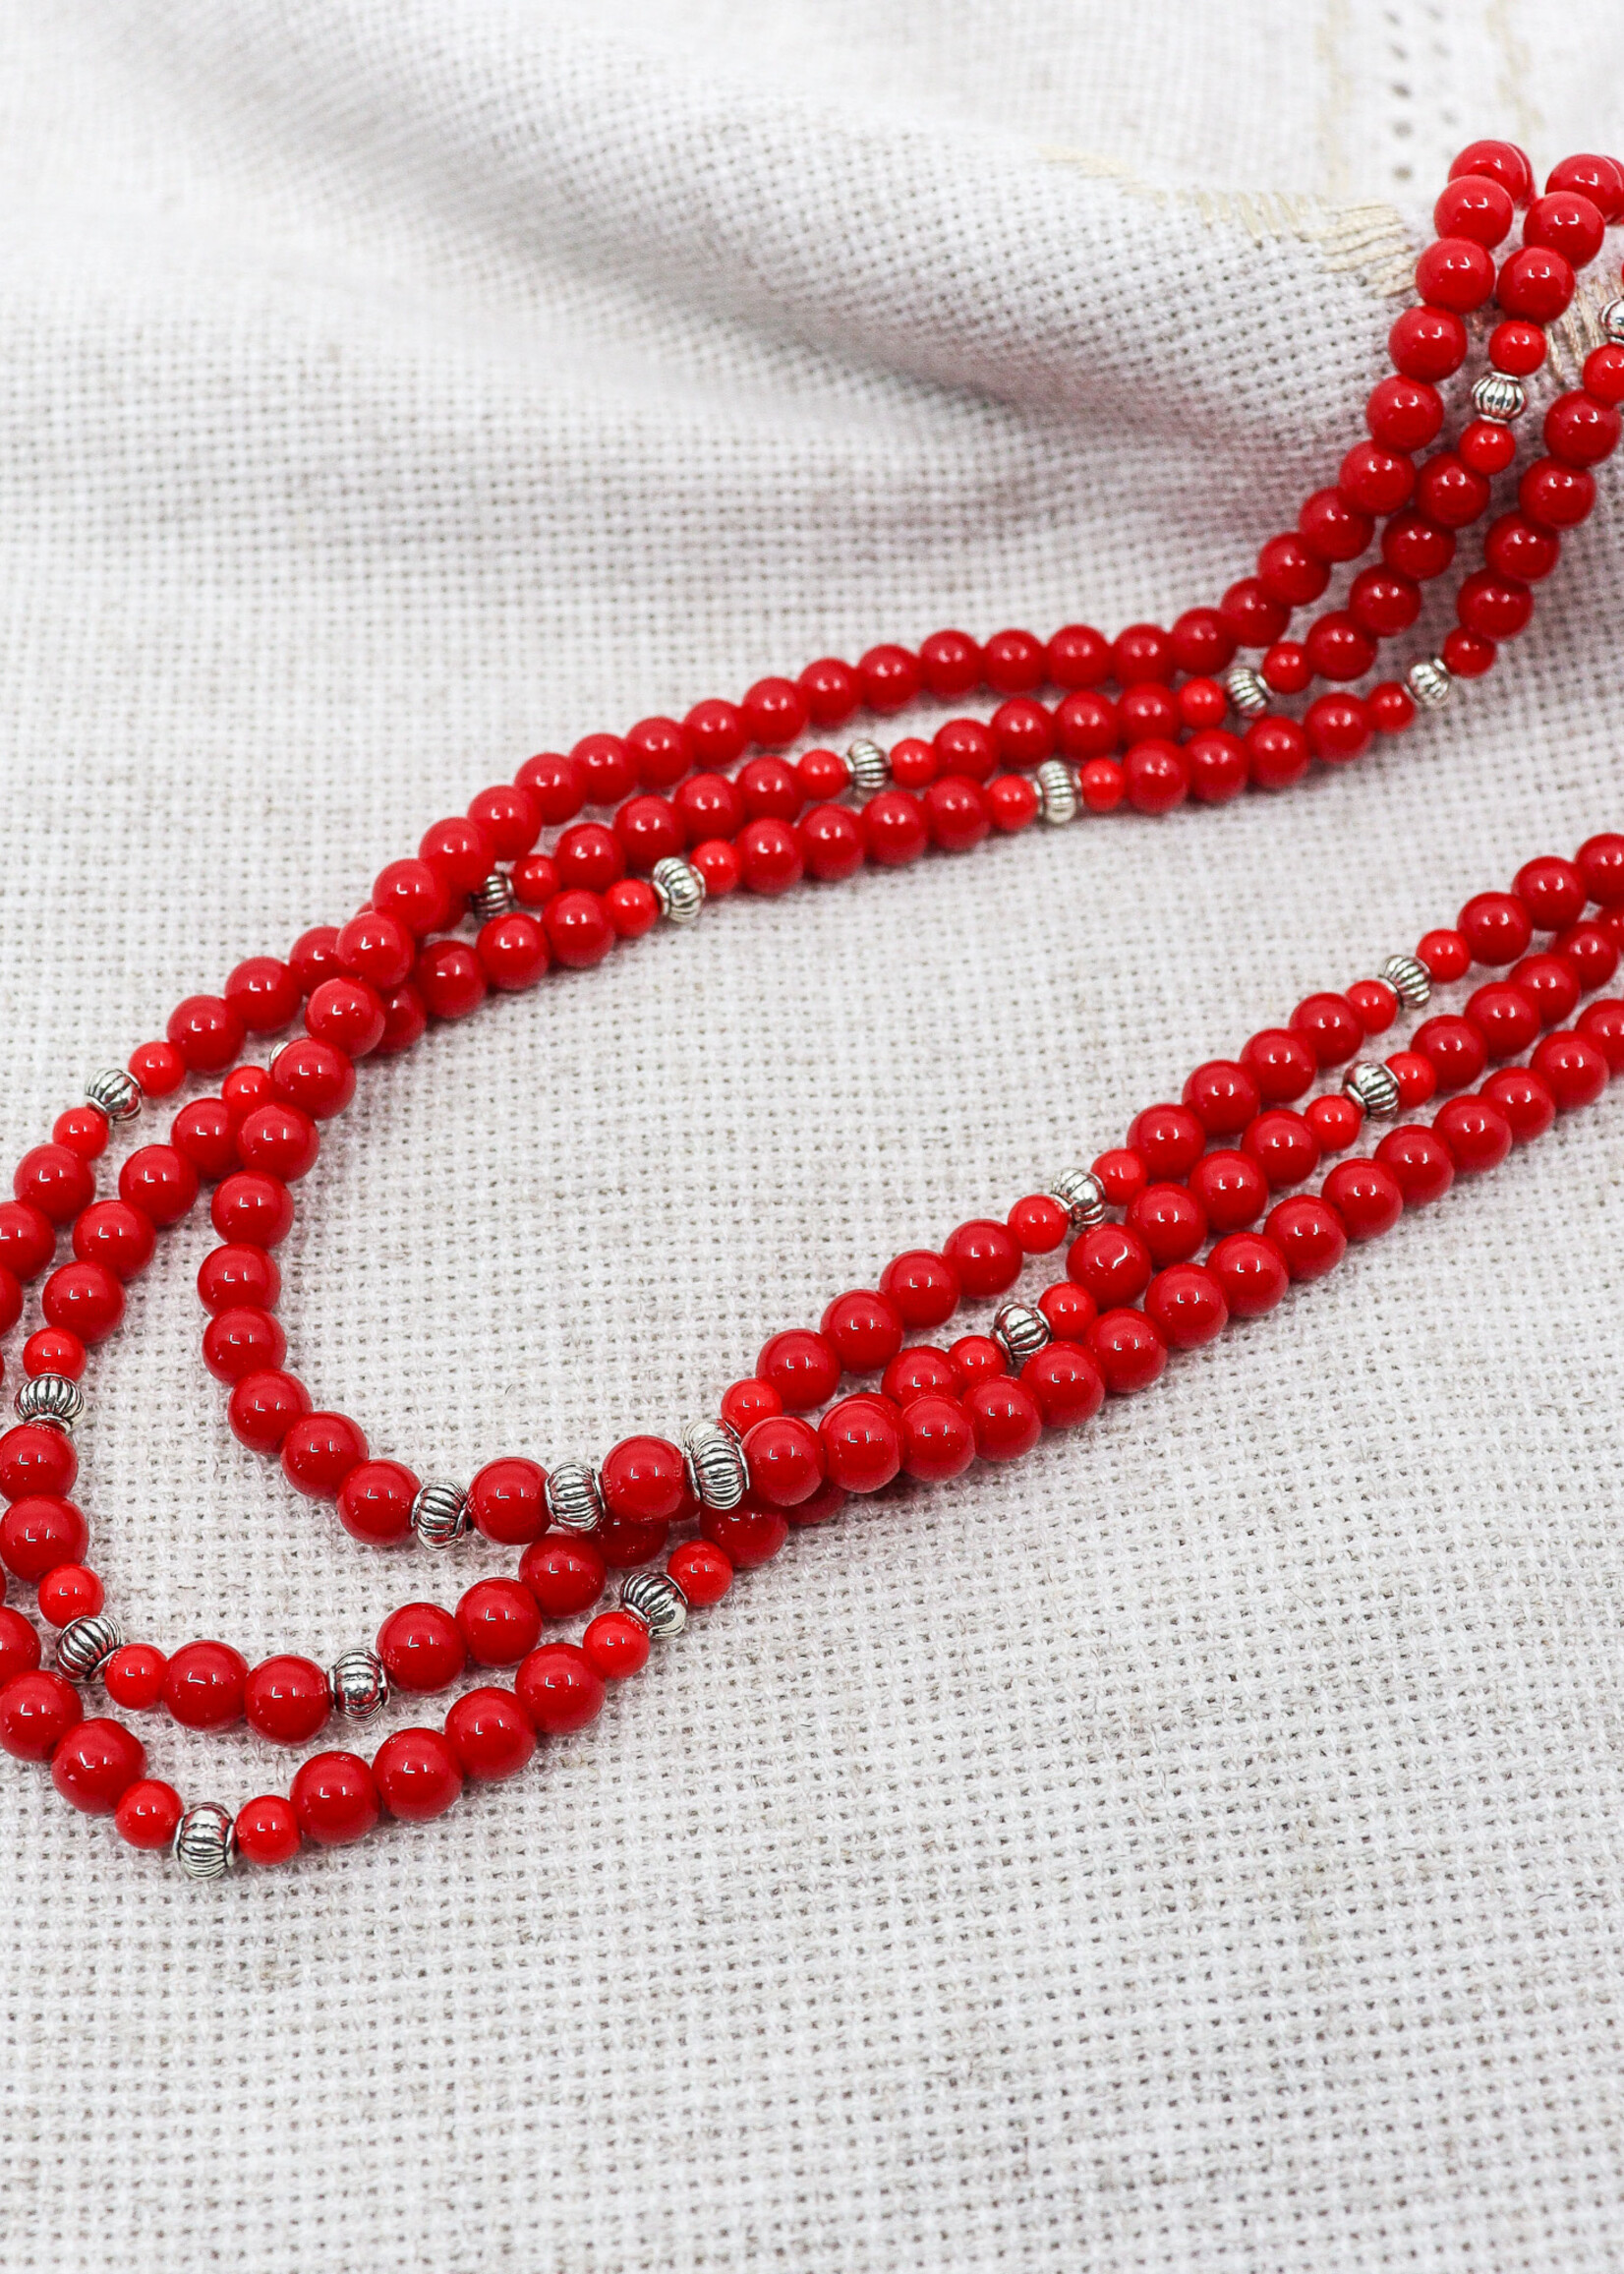 ACCESSORIES -  Necklace, Red stone  Beads and Silver Spacers / Multiple strand / Silver Lock